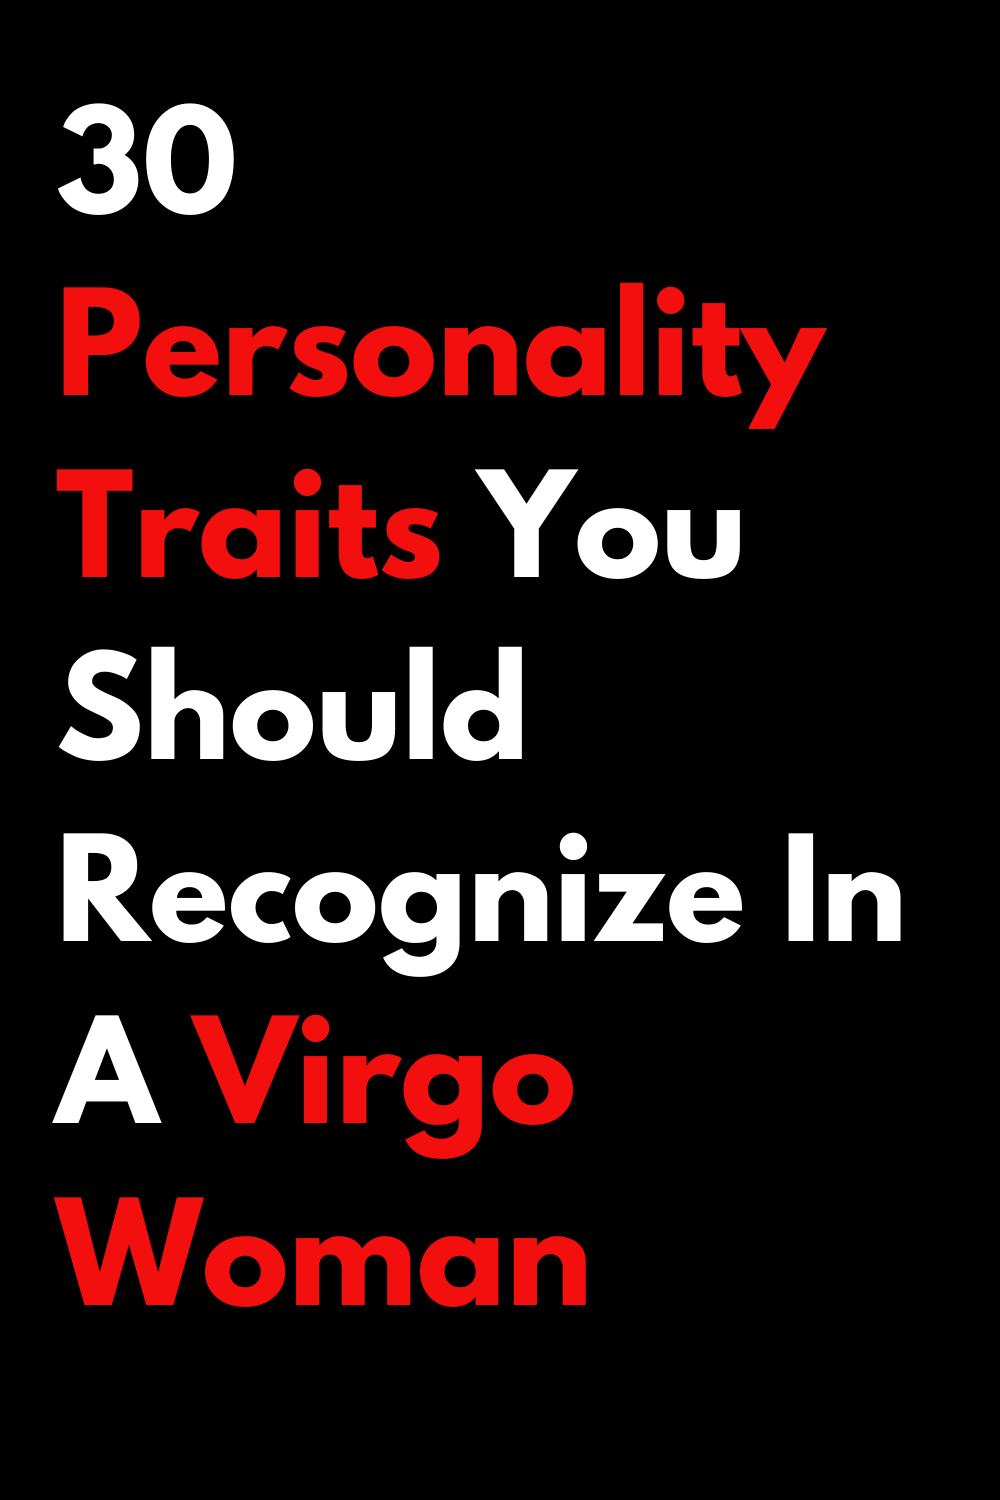 30 Personality Traits You Should Recognize In A Virgo Woman